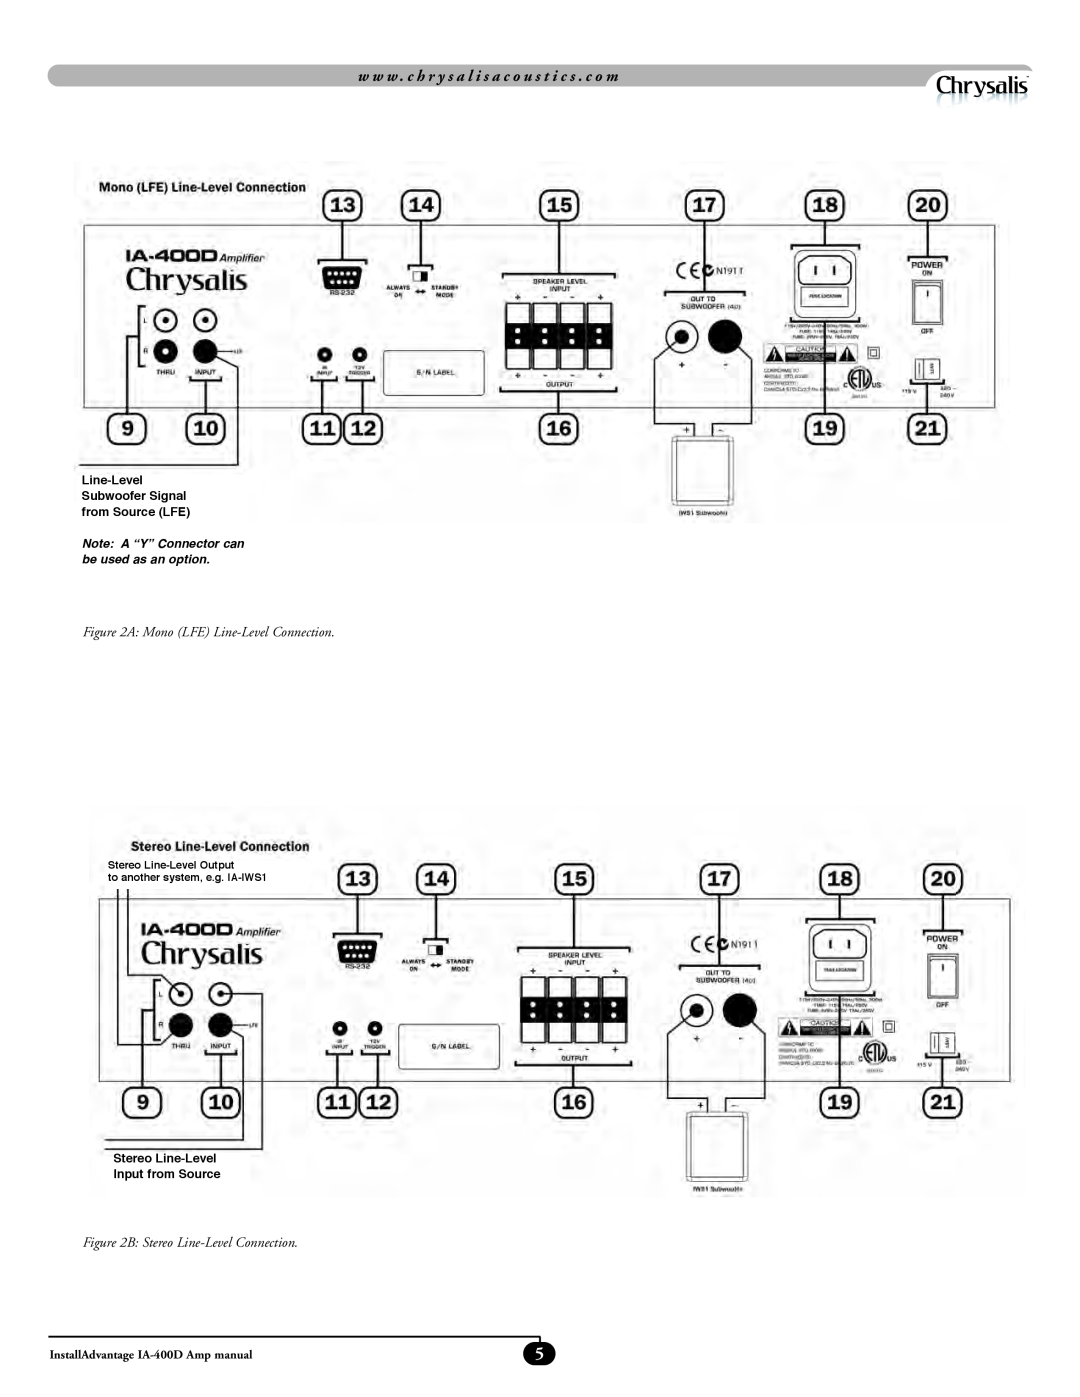 Chrysler IA-400D manual A Mono LFE Line-LevelConnection, B Stereo Line-LevelConnection, Stereo Line-Level Input from Source 